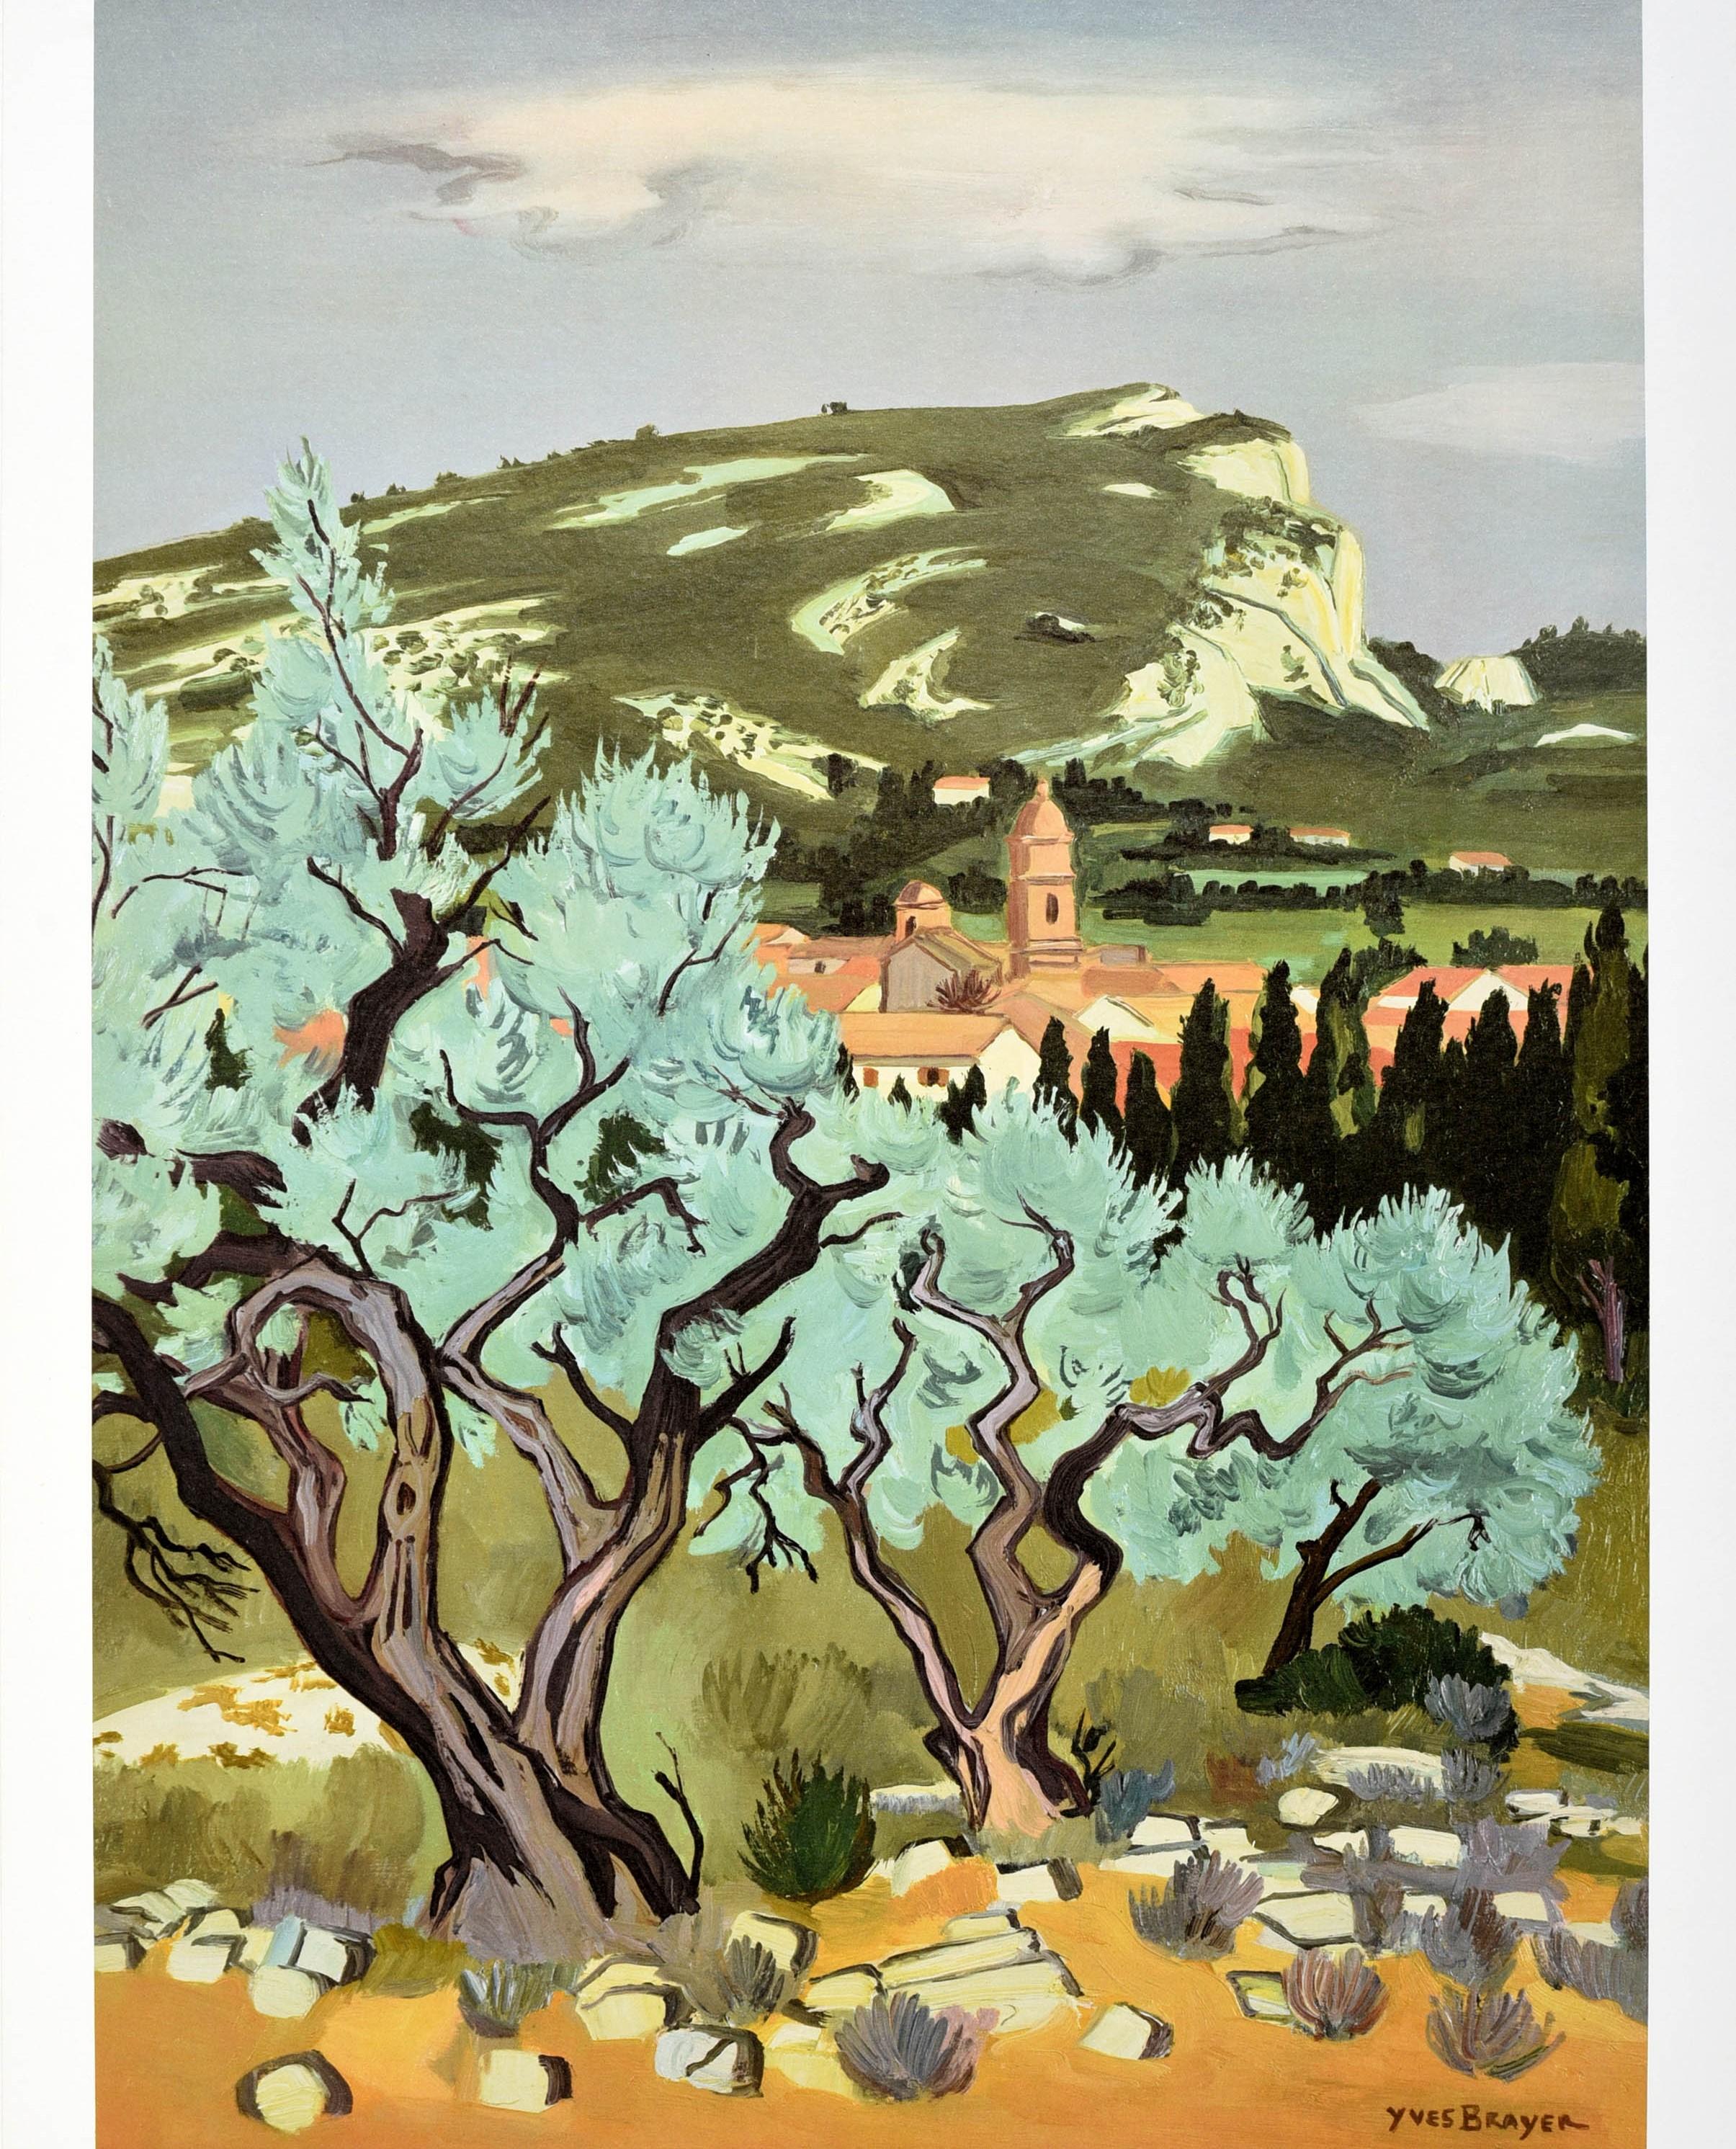 Mid-20th Century Original Vintage French Railway Travel Poster Provence Discover France By Train